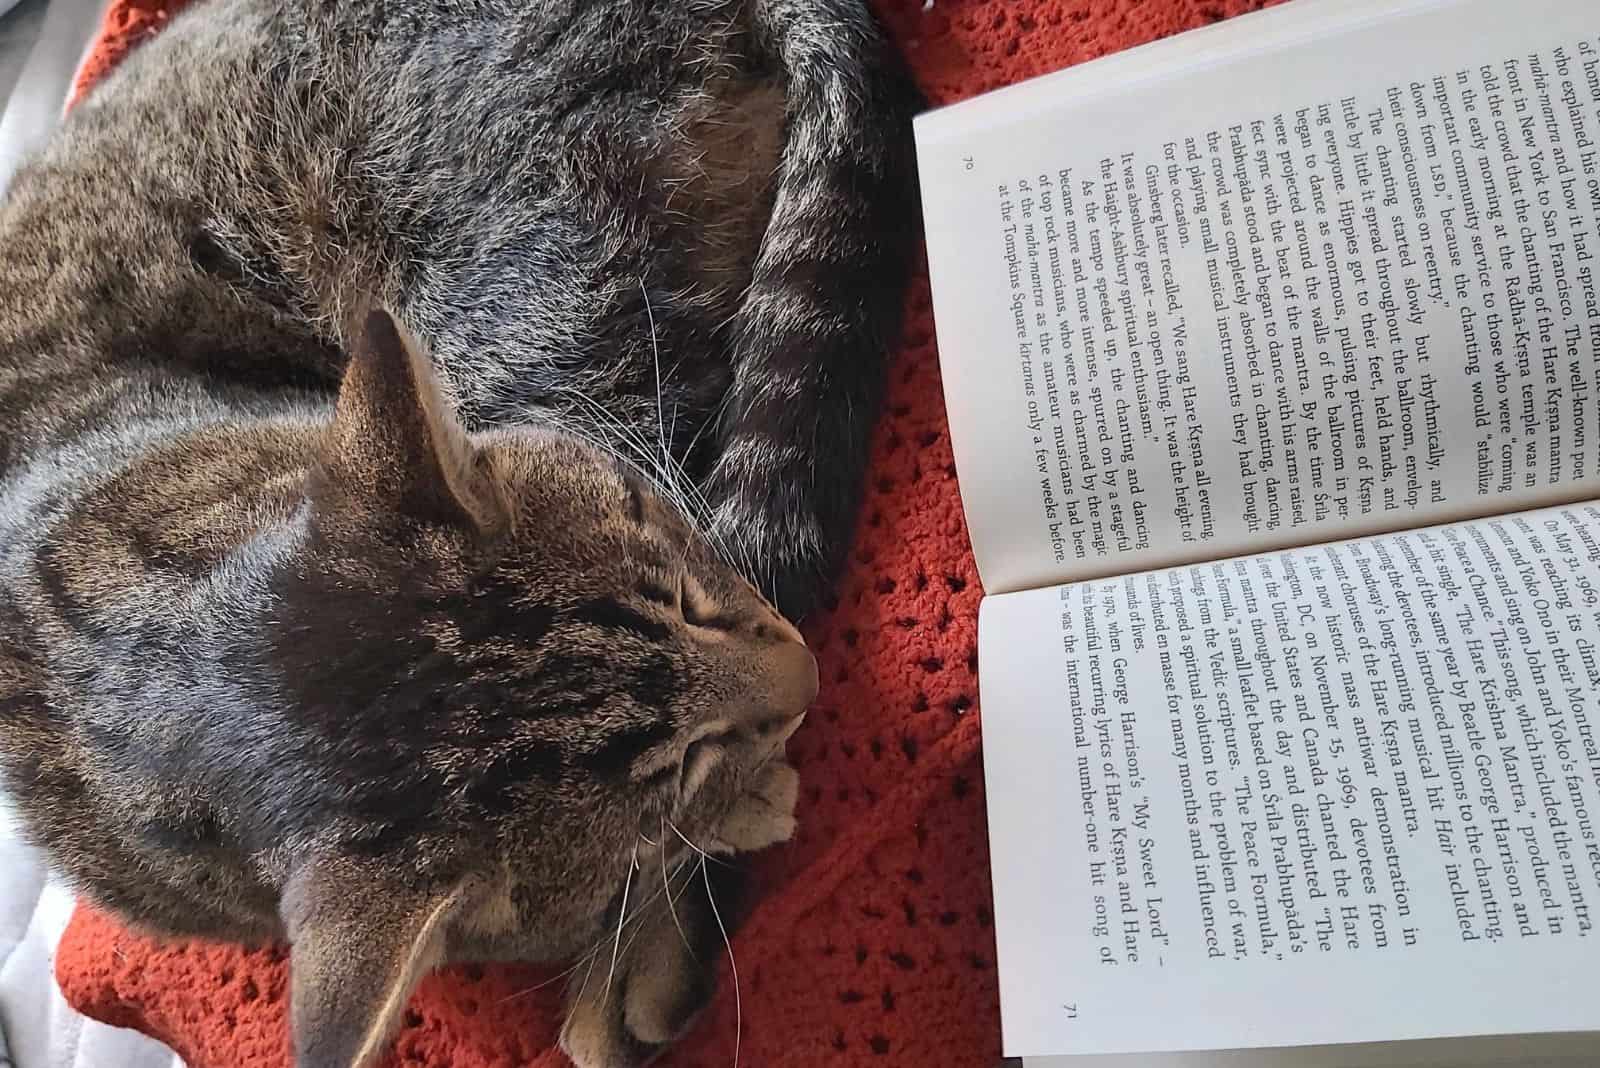 the cat sits next to Mikey's open book